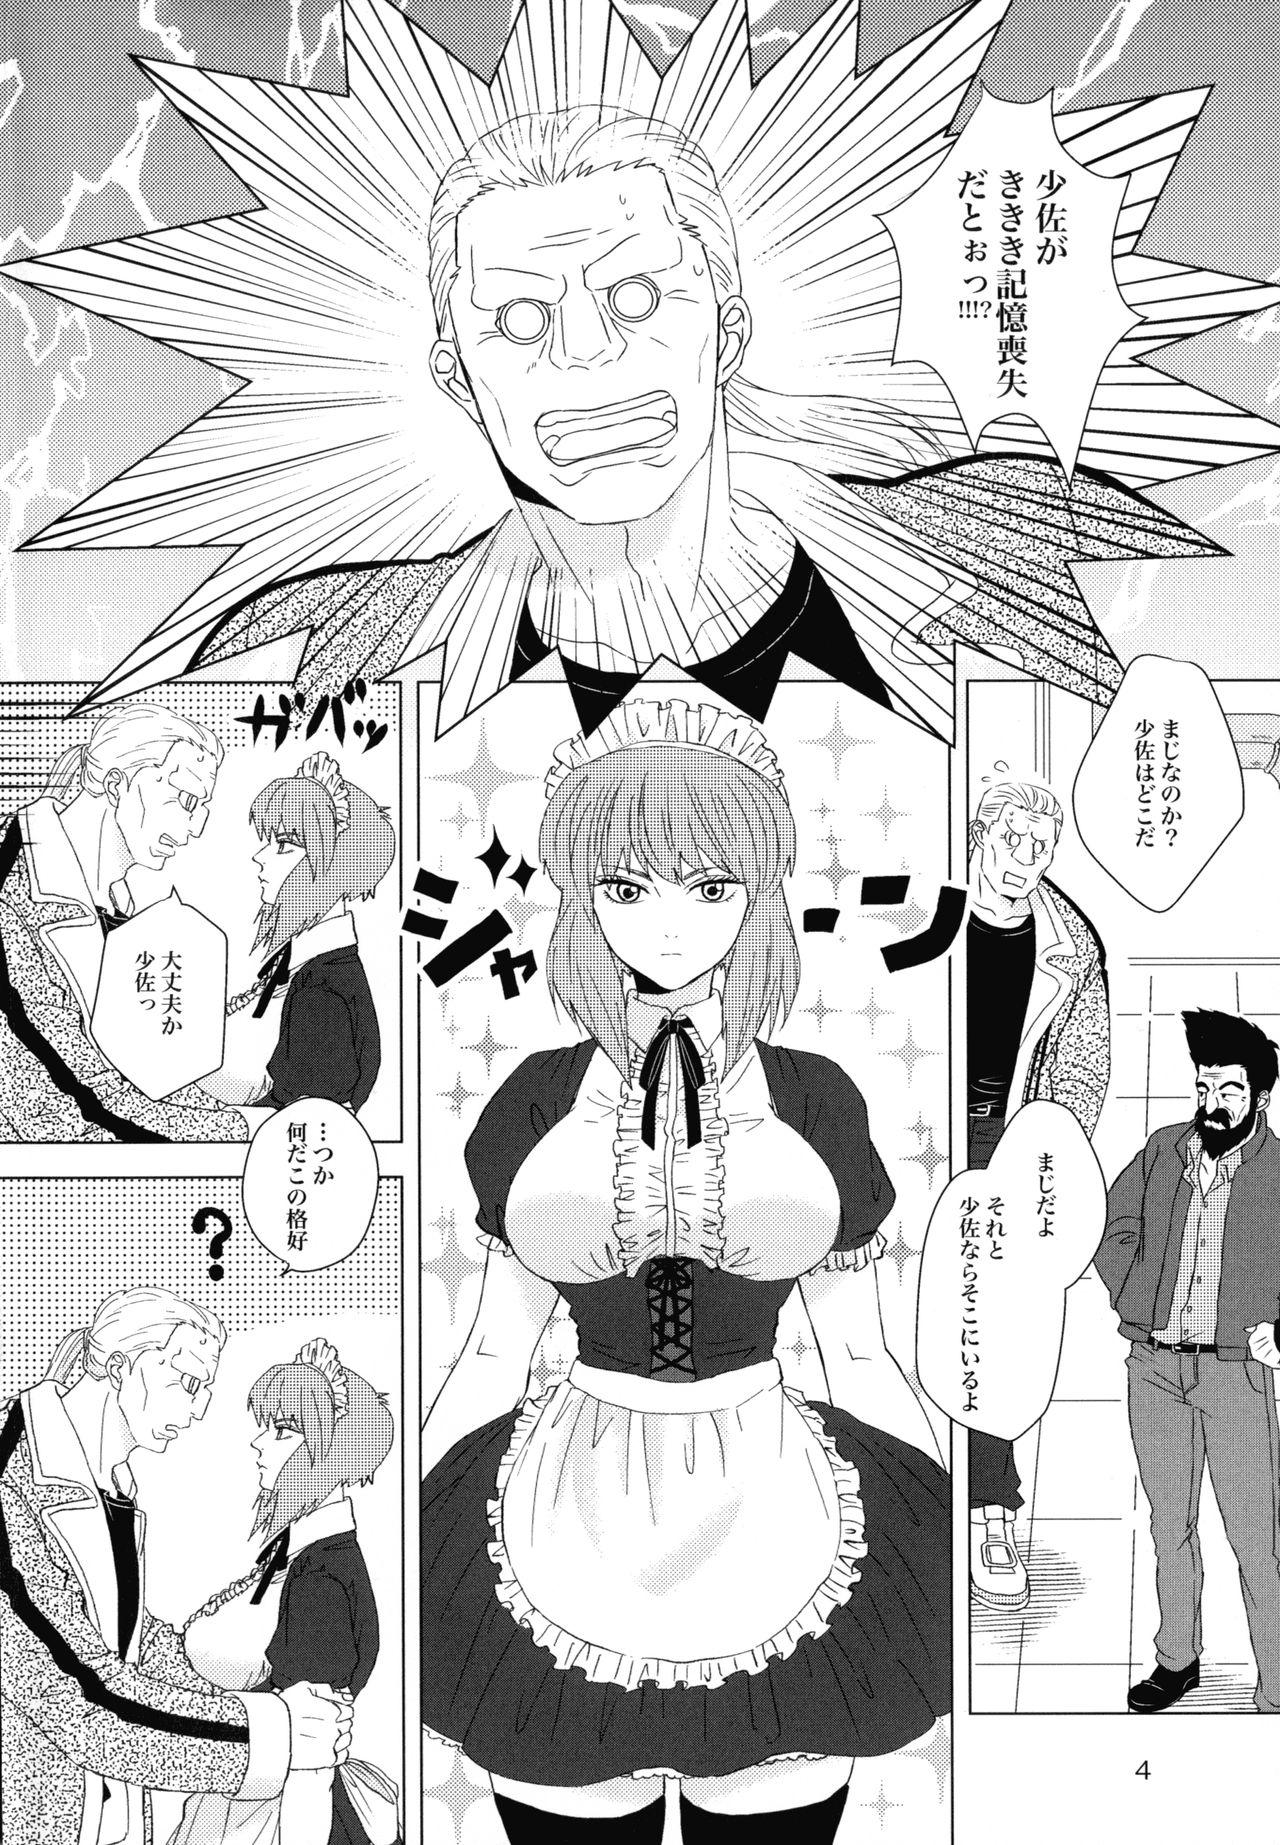 Soapy FRENCHMAIDCOSTUME BTMT - Ghost in the shell Chudai - Page 4